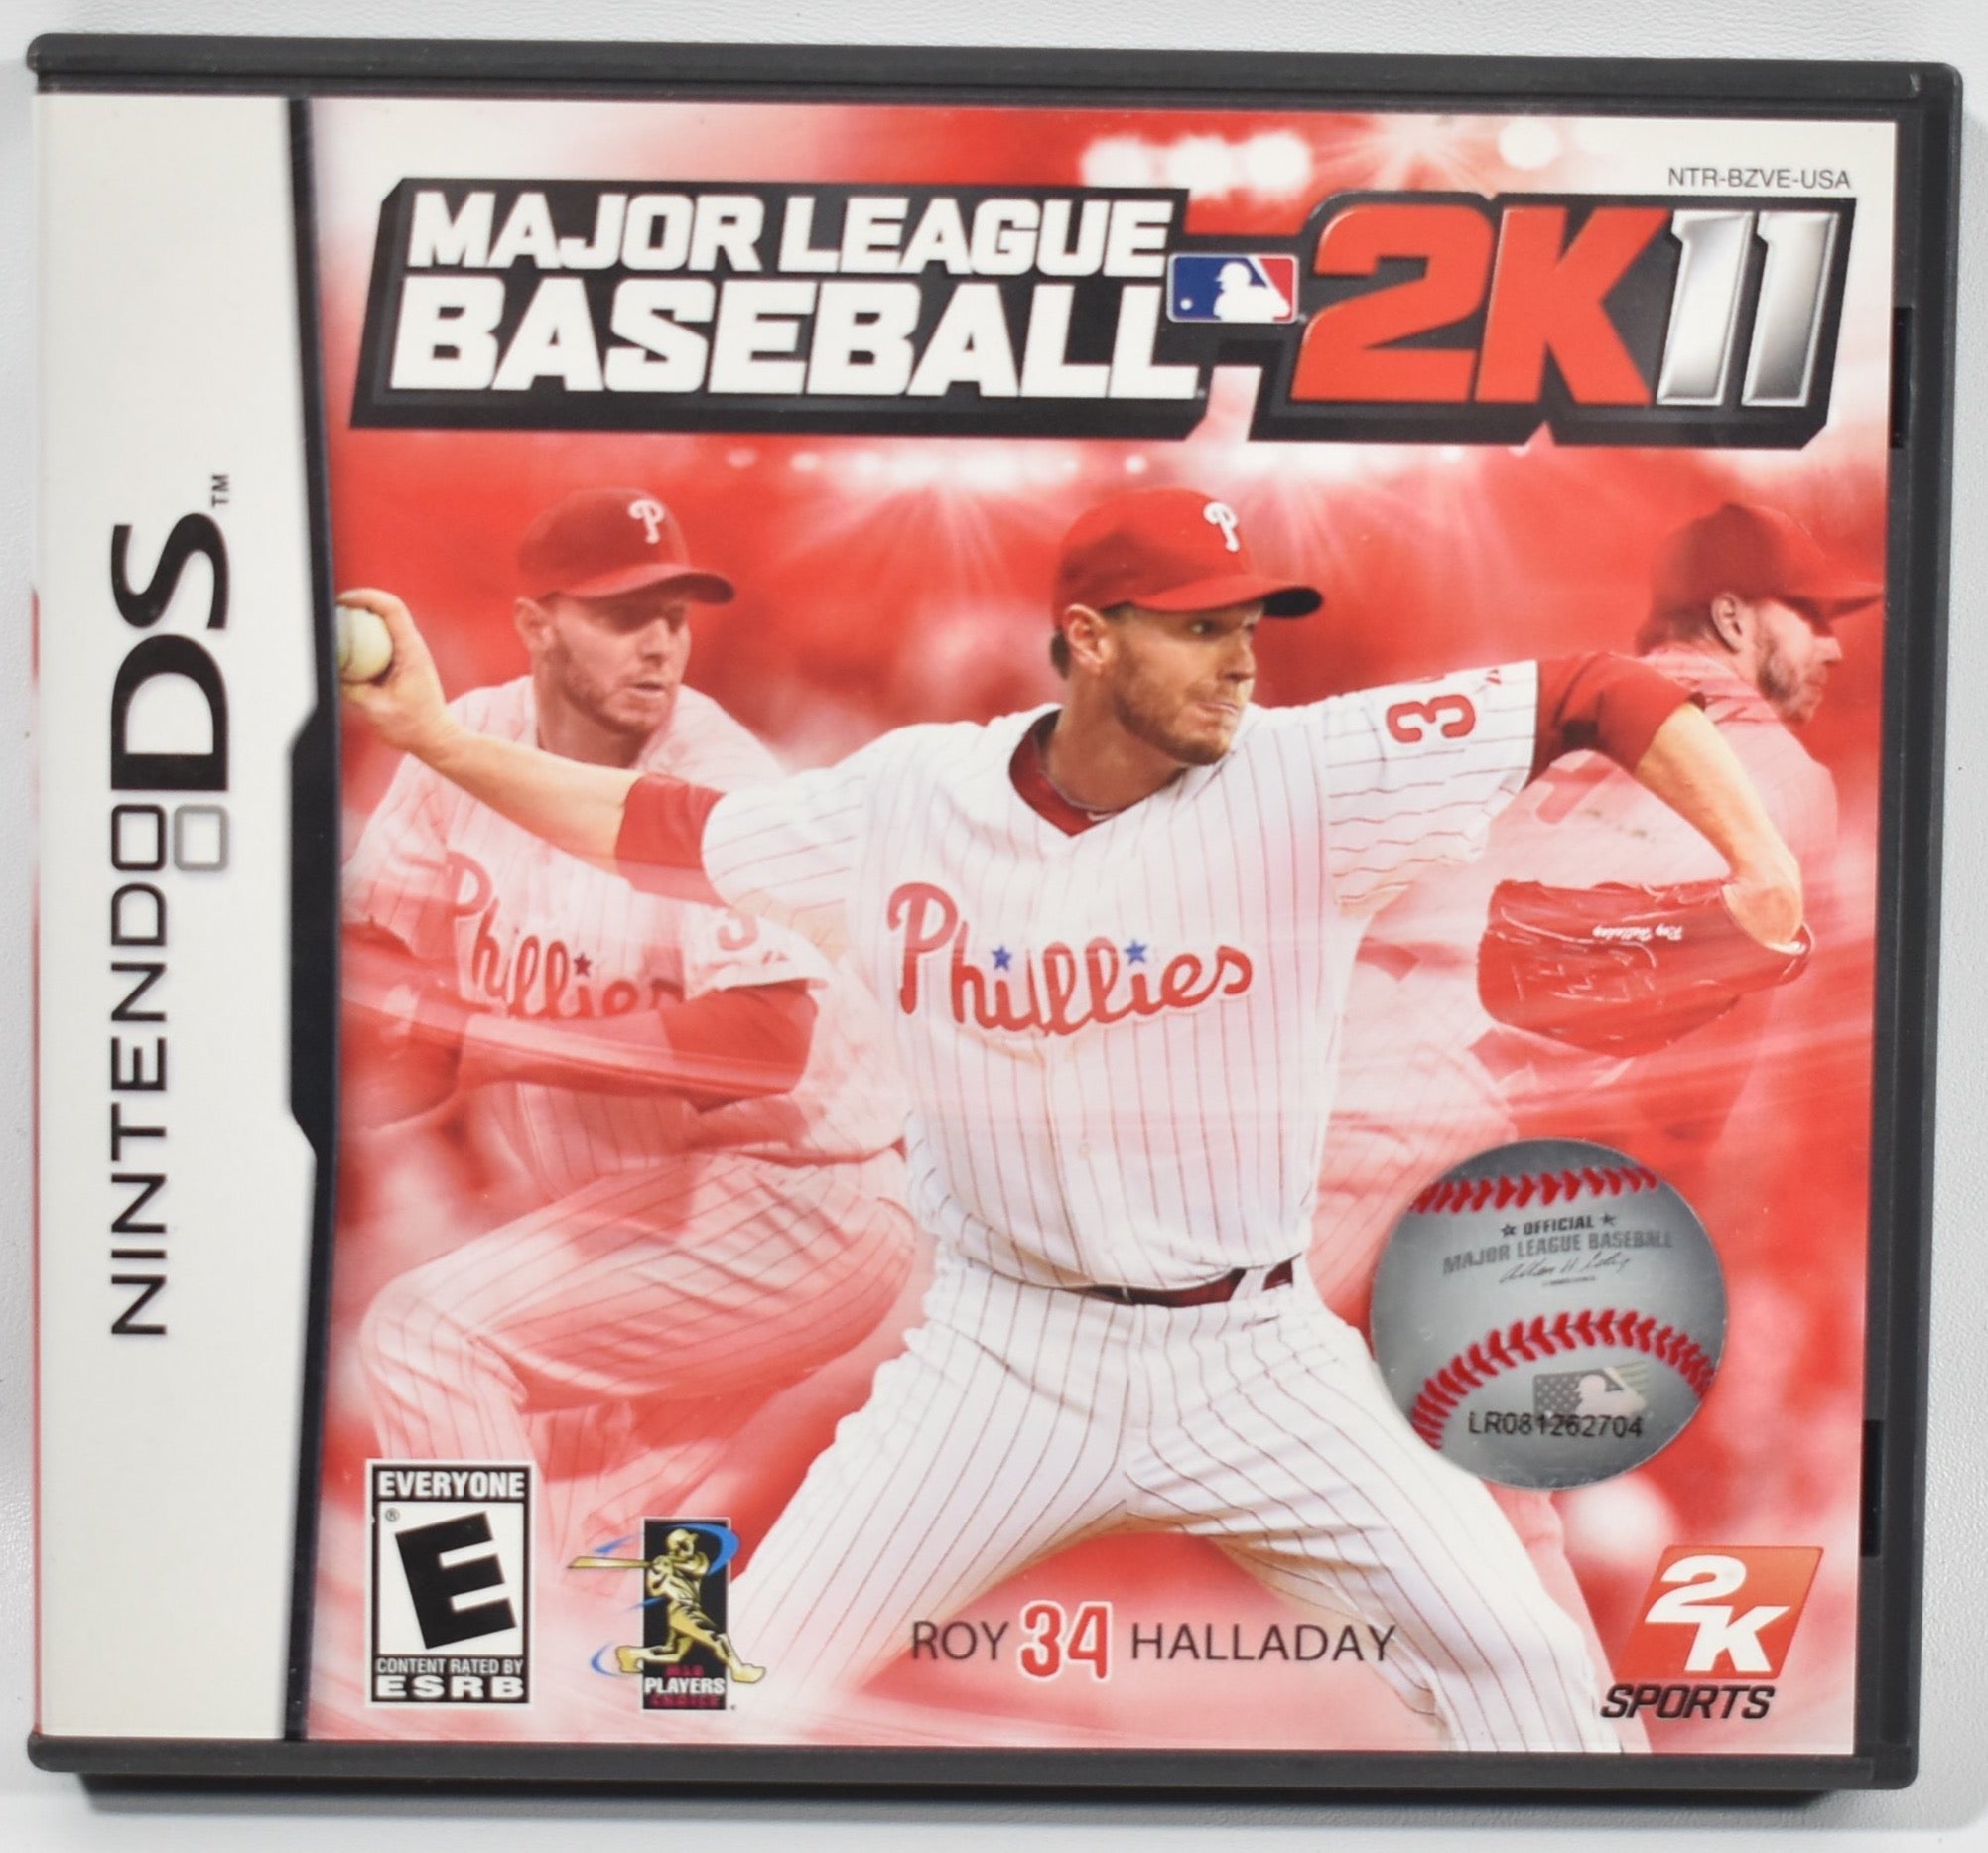 Major League Baseball 2K11 Ds Video Game Used